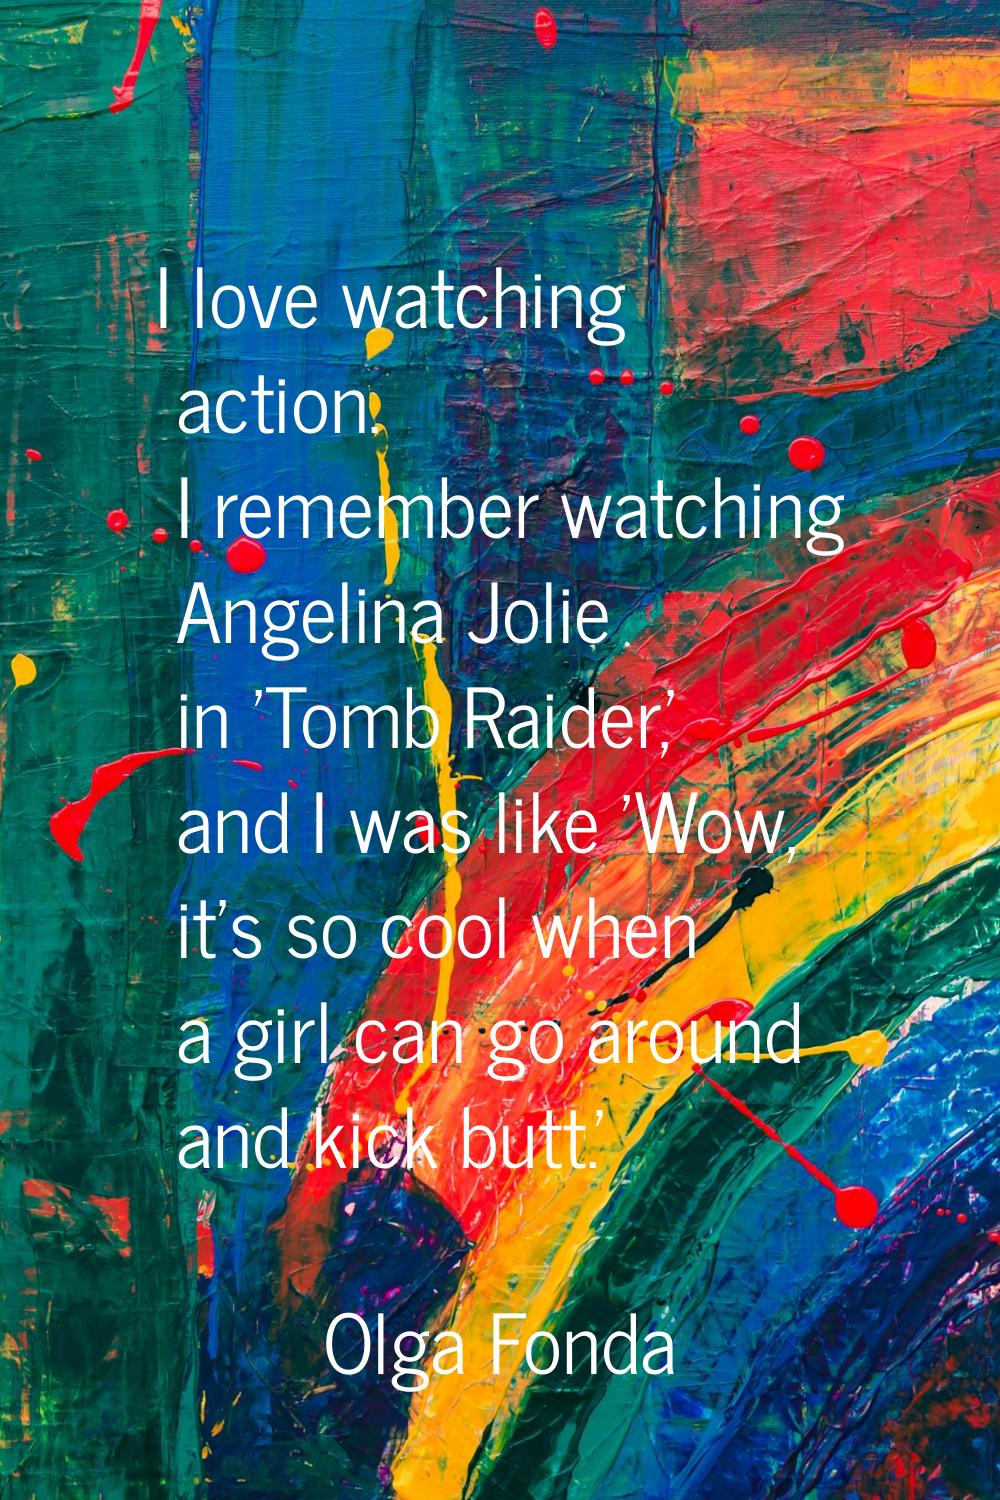 I love watching action. I remember watching Angelina Jolie in 'Tomb Raider,' and I was like 'Wow, i